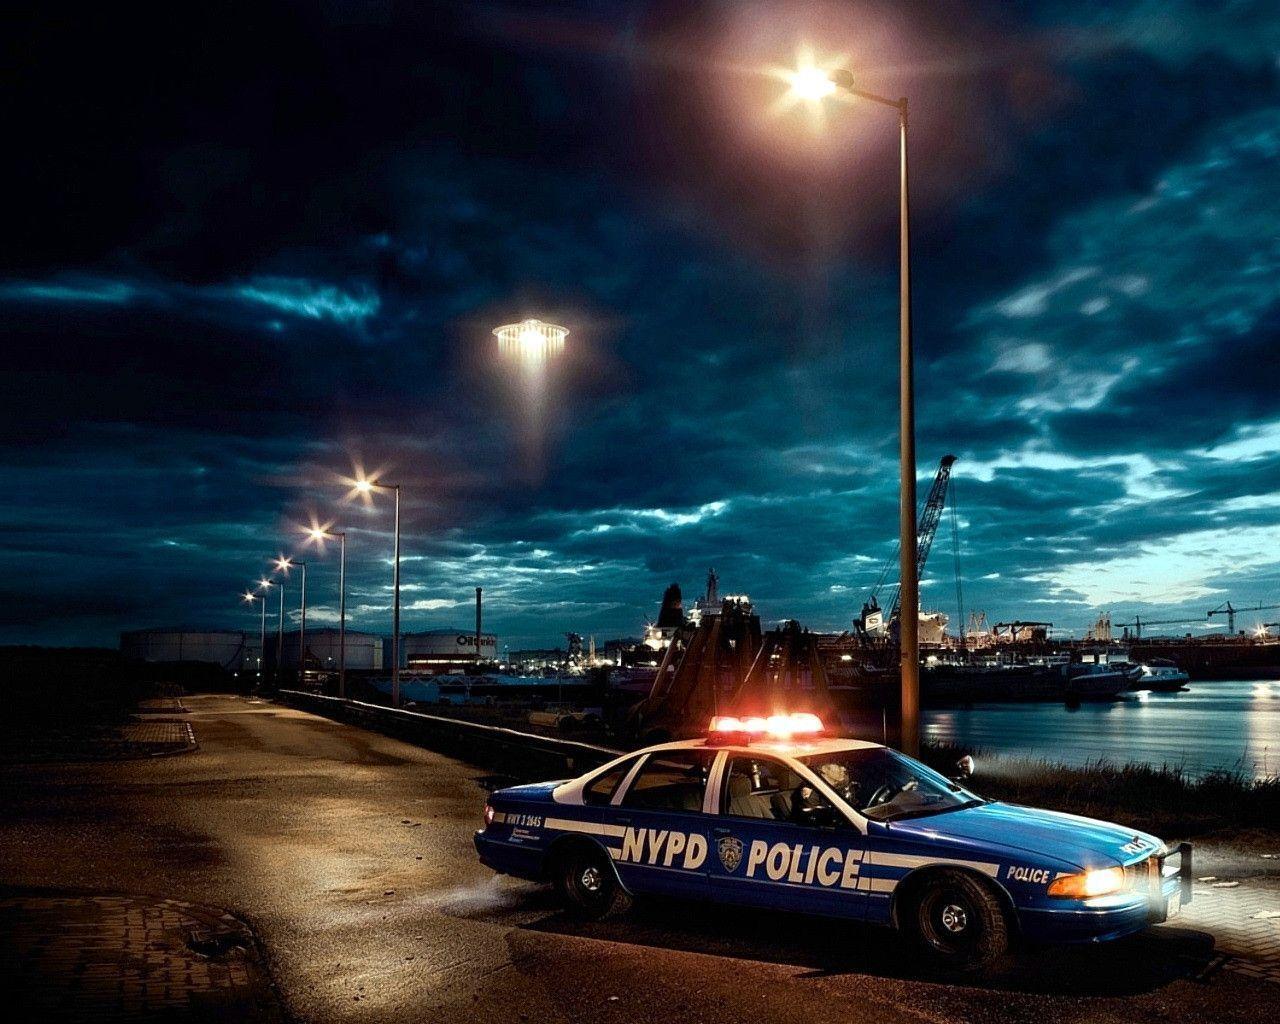 Police wallpaper Gallery. Beautiful and Interesting Image